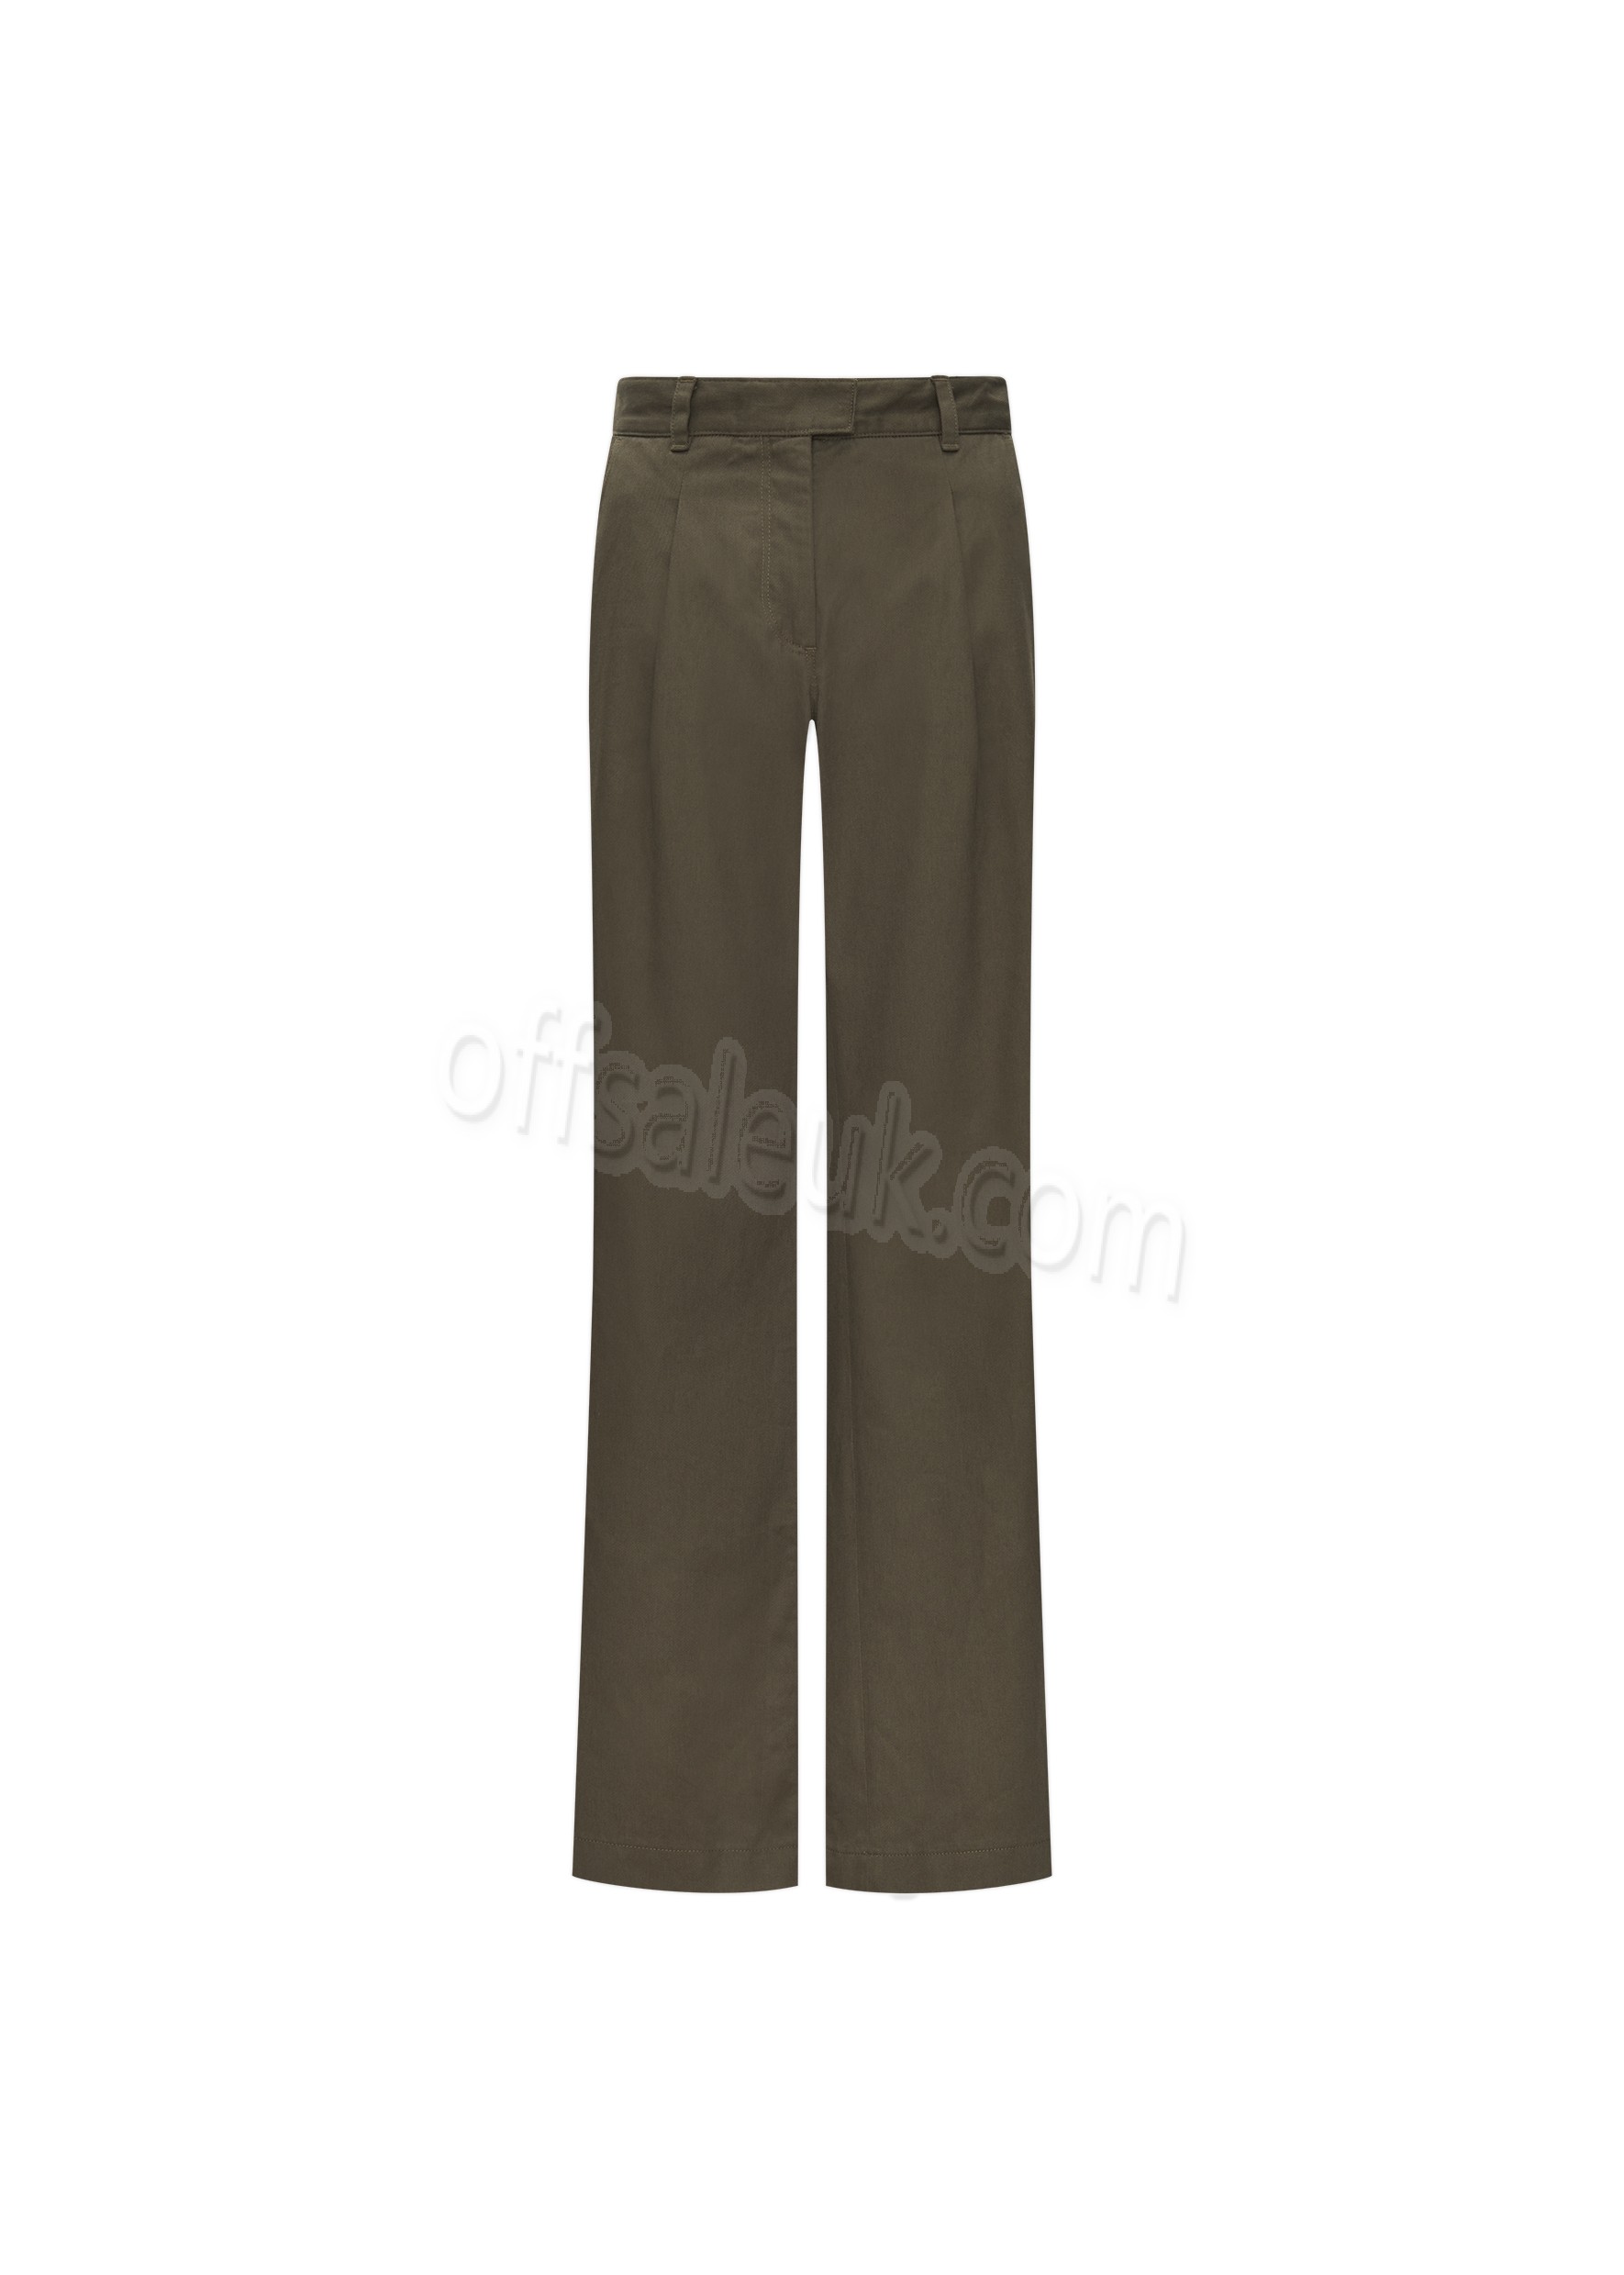 Discount COTTON TWILL ANGIE PLEATED TROUSER - Discount COTTON TWILL ANGIE PLEATED TROUSER